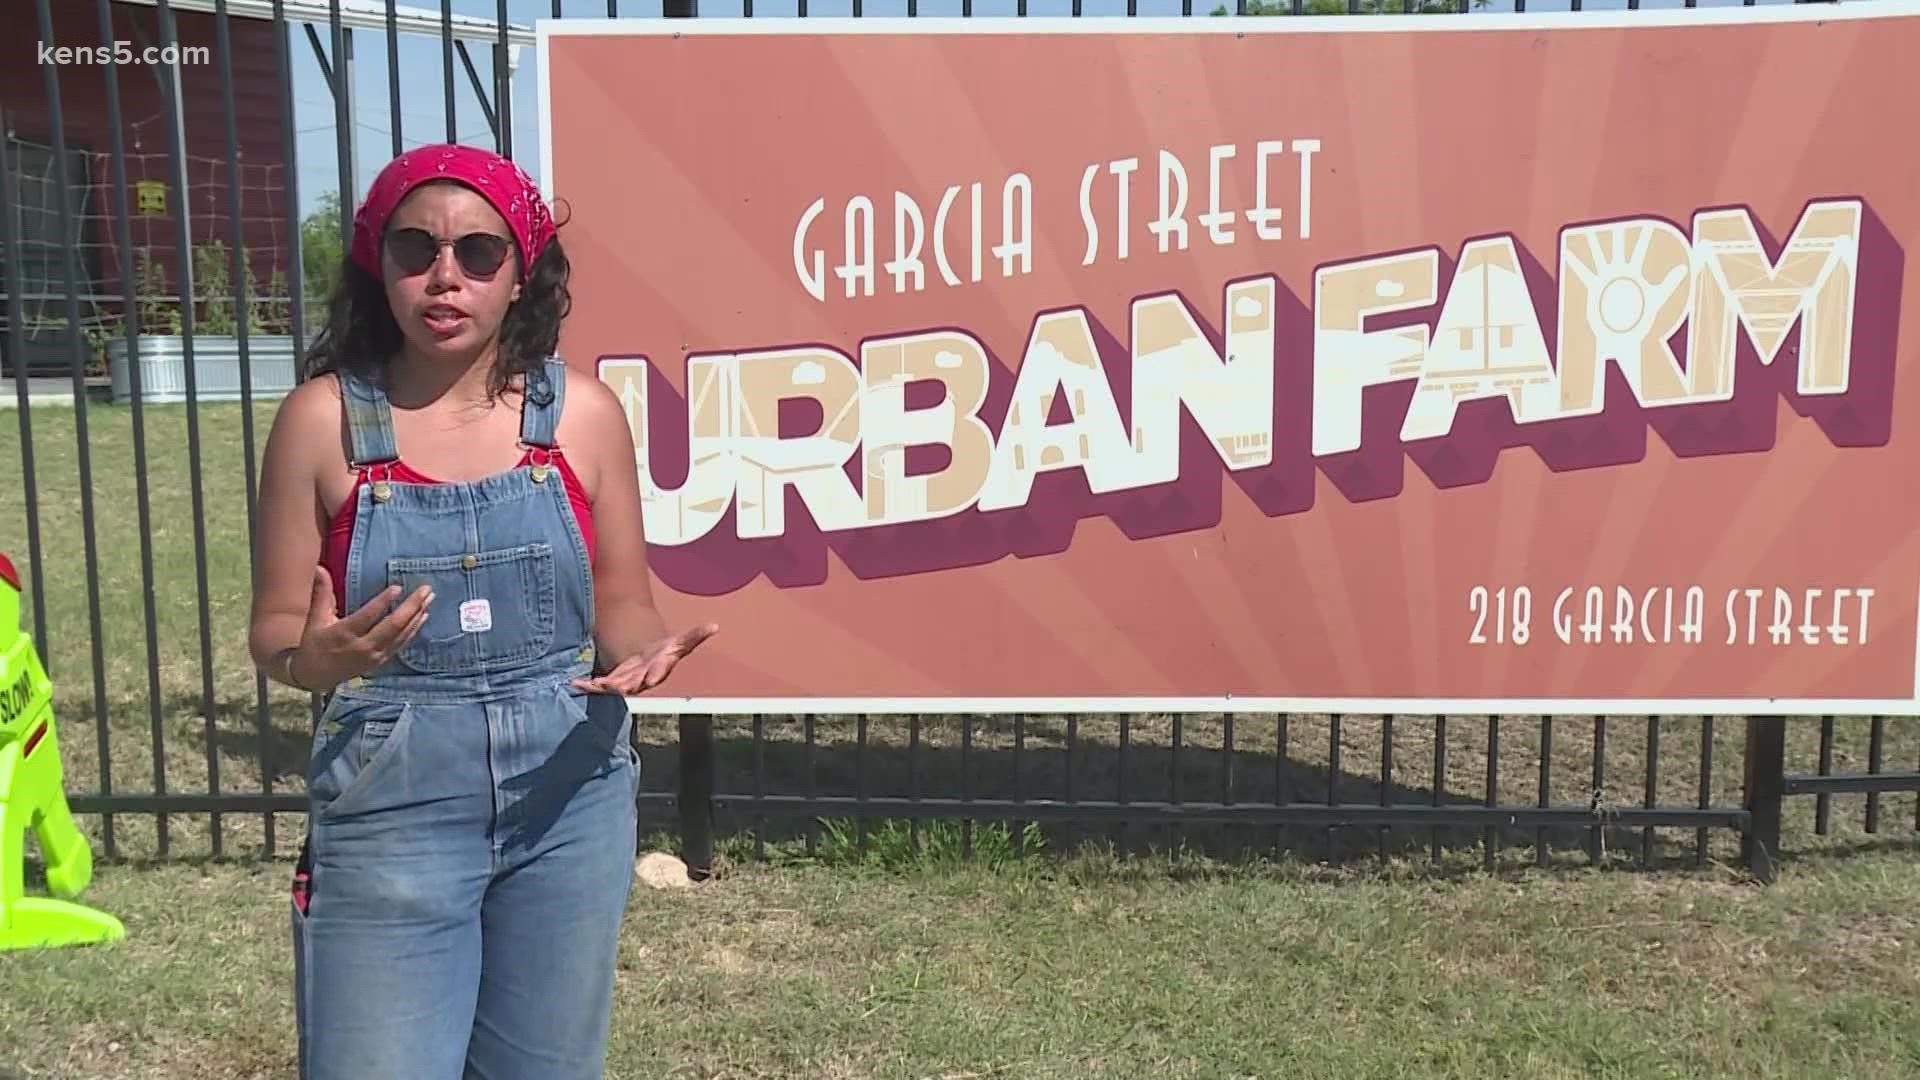 The Garcia Street Urban Farm helps provide healthy, affordable produce for the community. Lately, working without a tractor has been slowing them down.